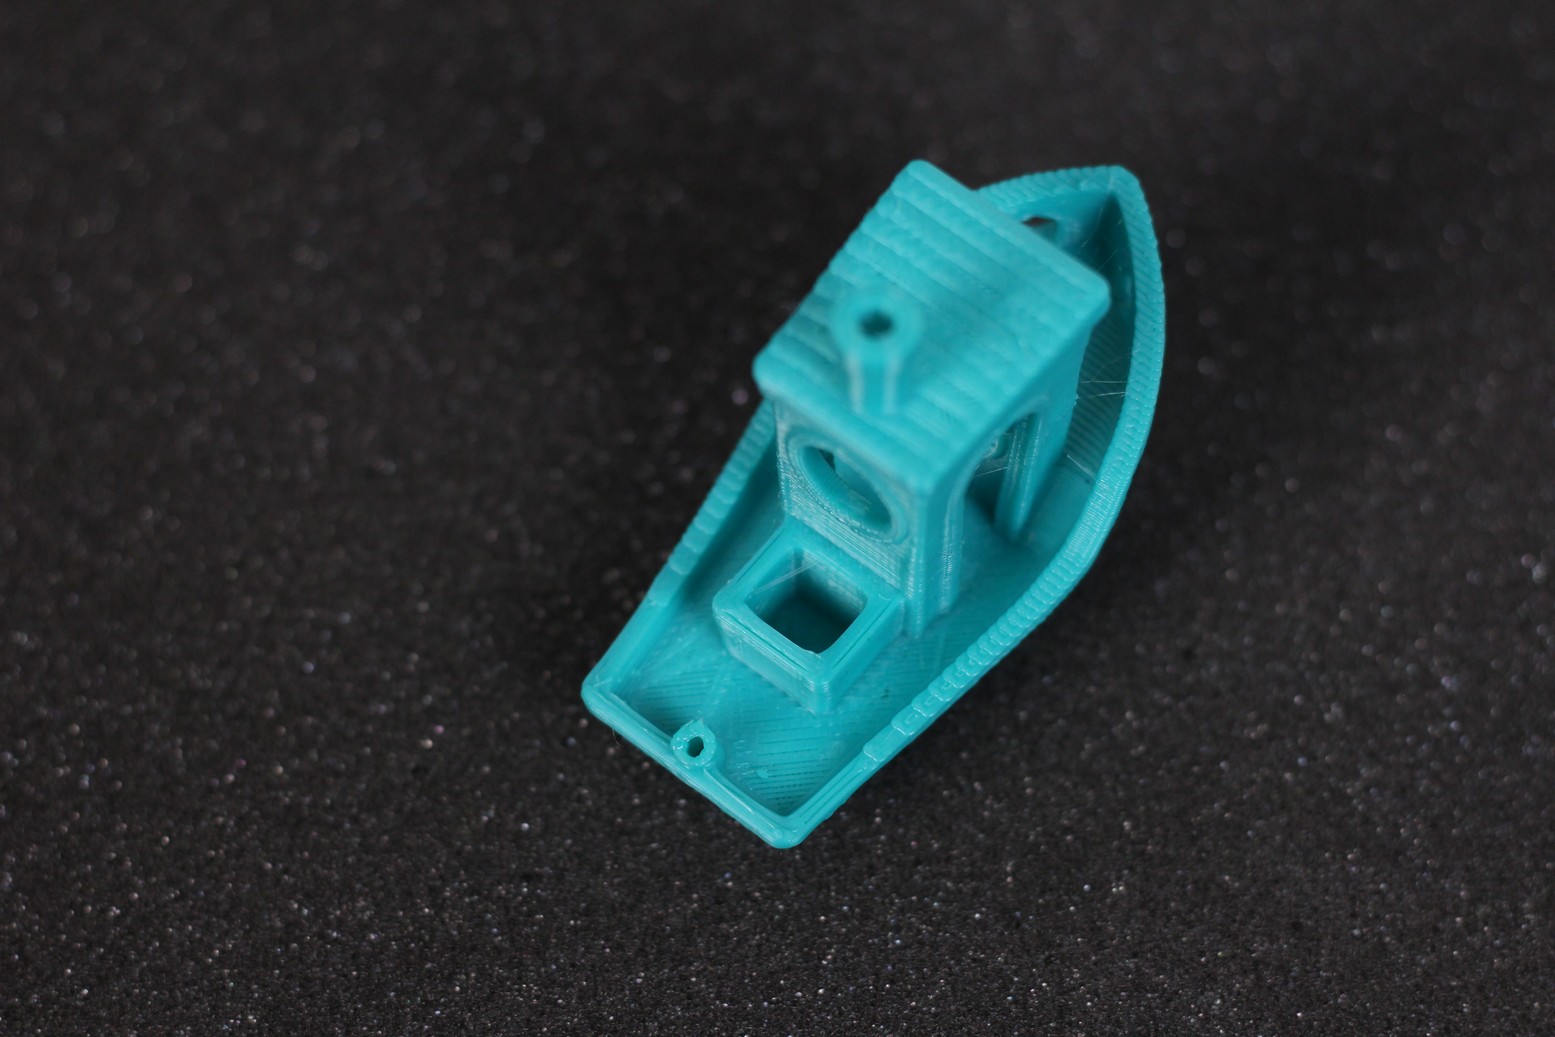 Ender 2 Pro 3D Benchy 7 | Creality Ender 2 Pro Review: Is it worth it?